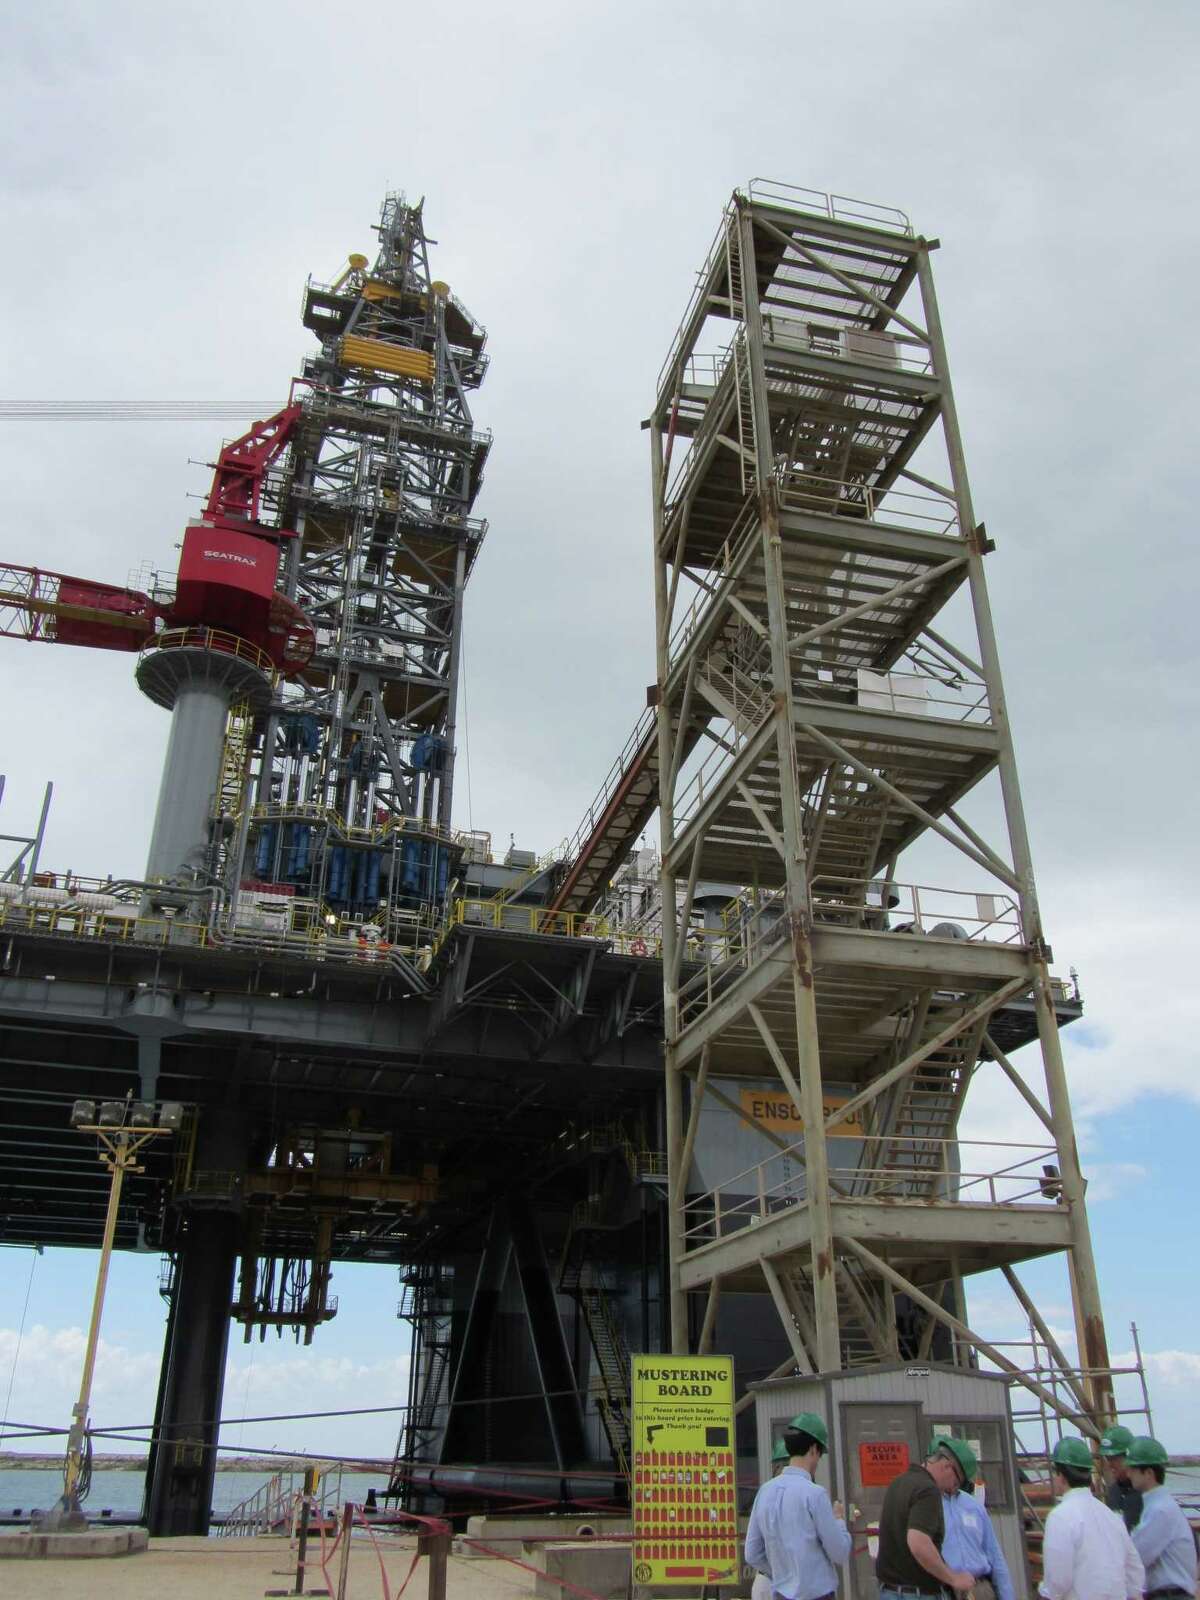 The main deck of the ENSCO 8505 is 97 feet high; the derrick is another 201 feet. The main deck tower Is more than six stories above the dock level. April 11, 2012